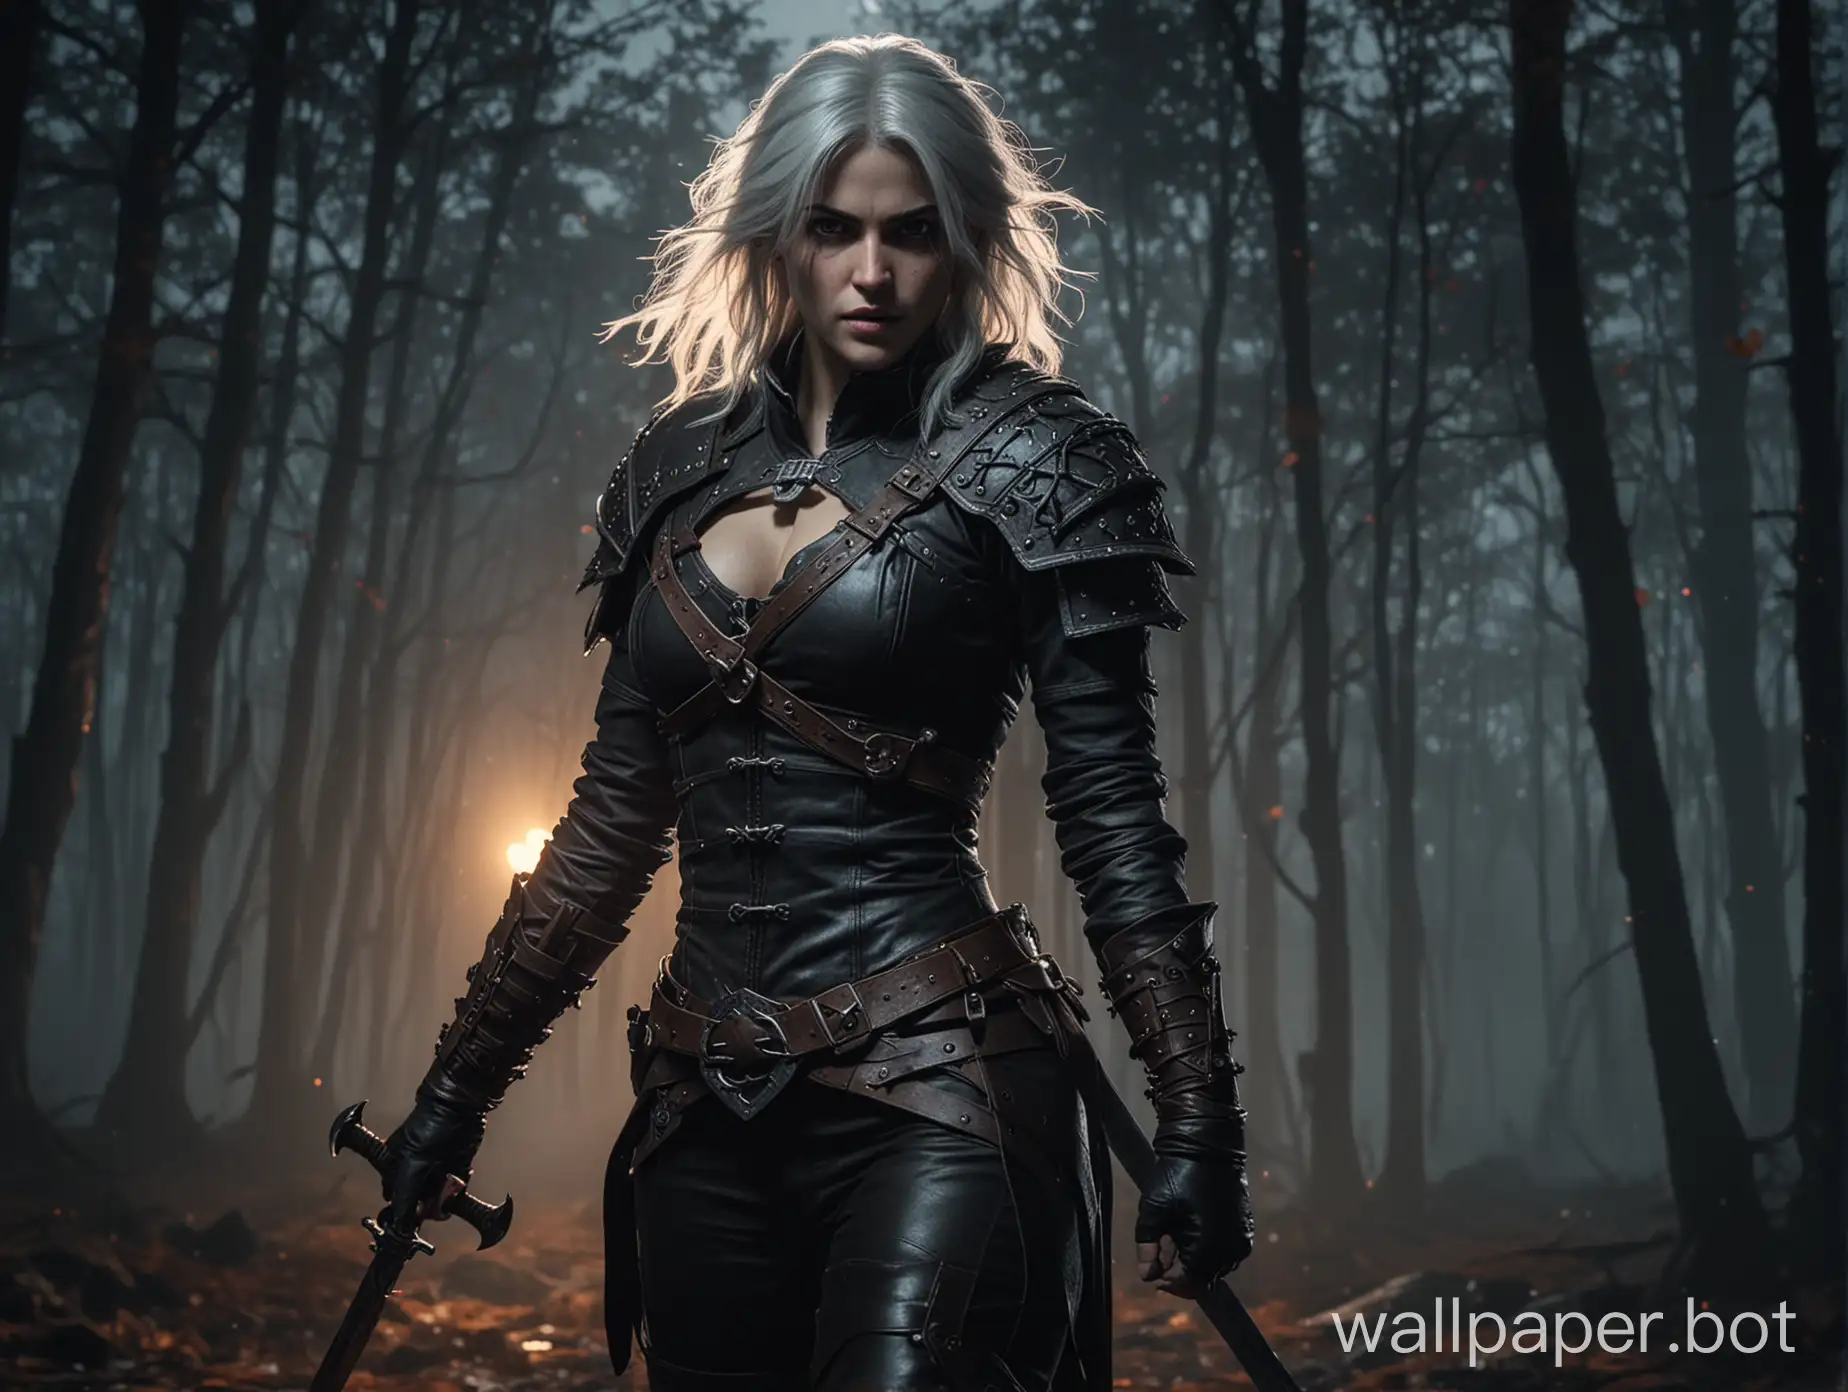 Cirilla from Witcher in leather armor, with a sword in hand, goes through the moonlit forest, fiery wolf eyes in the background, 4K